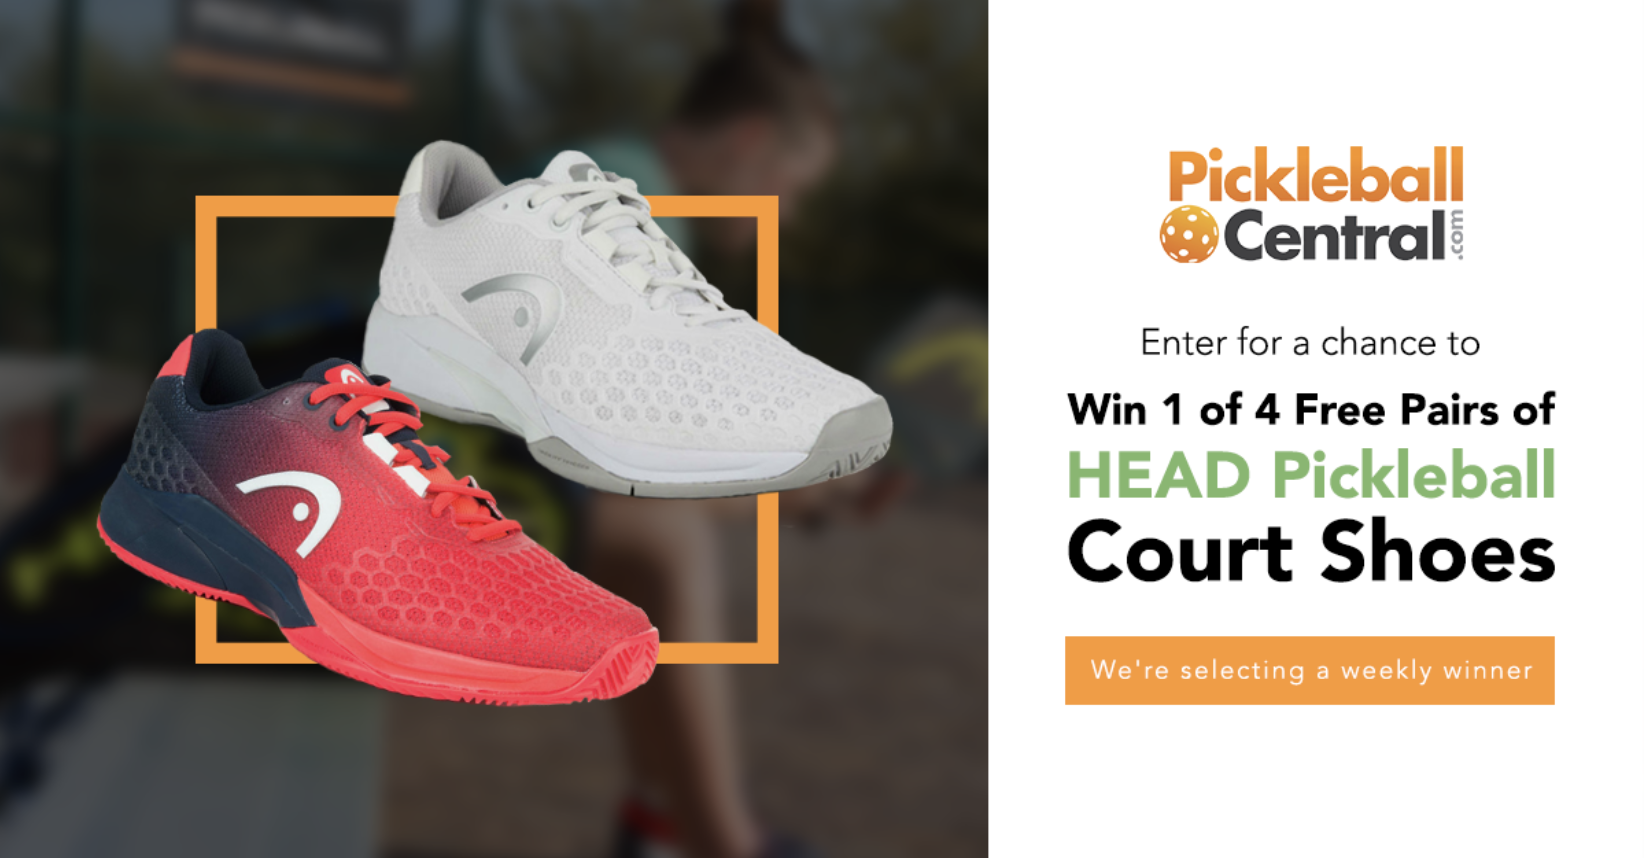 Win 1 of 4 Free Pairs of HEAD Pickleball Court Shoes